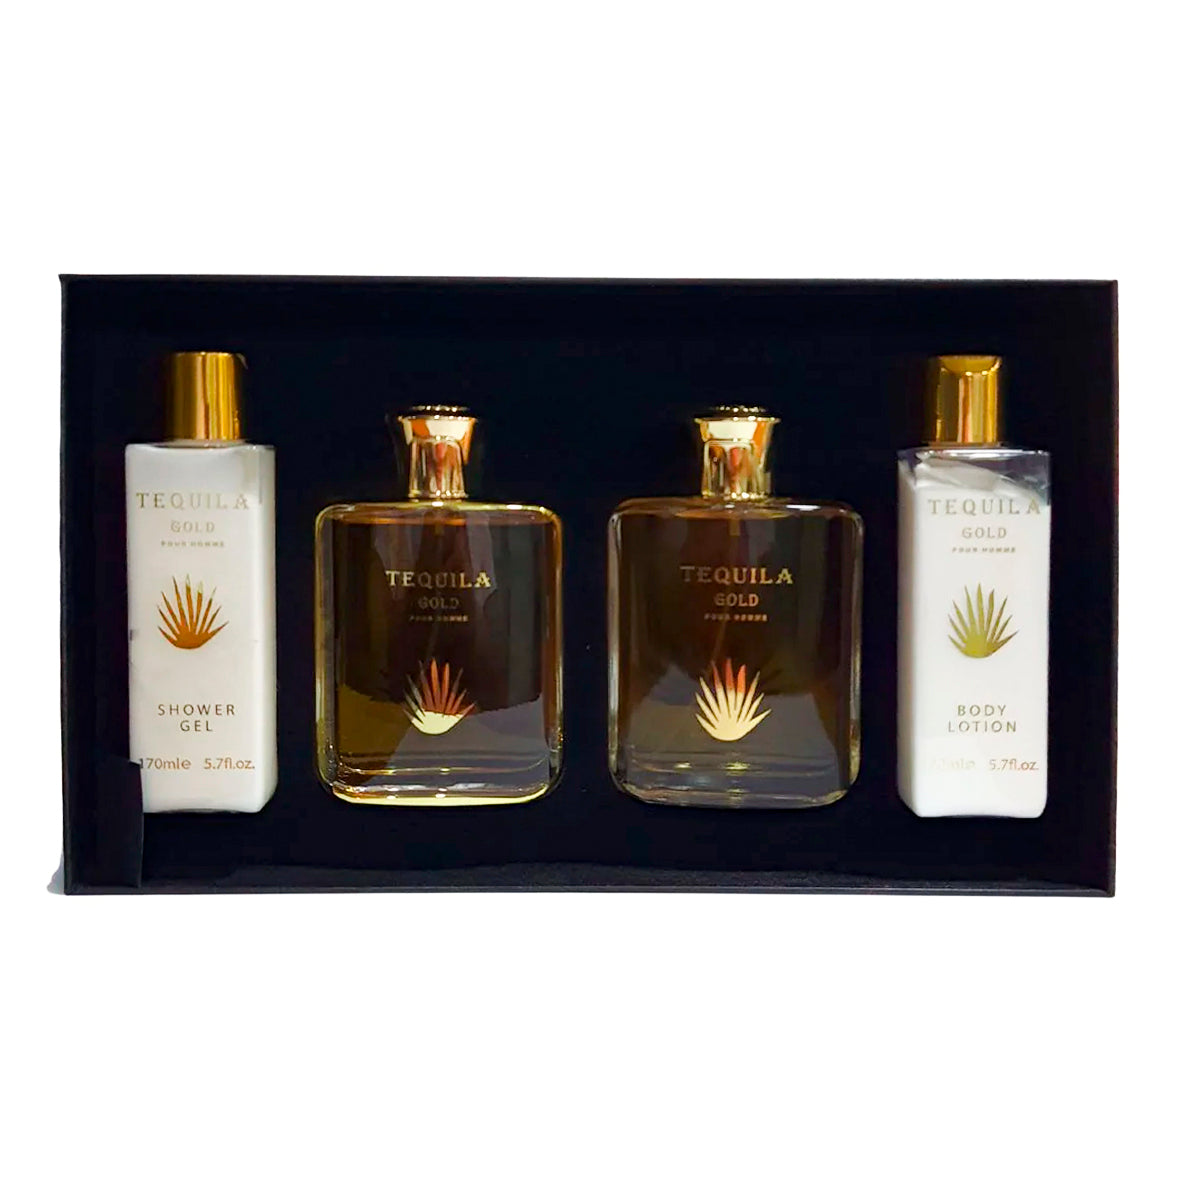 Tequila Gold Pour Homme EDP 100 ML + Body Lotion 175 ML +  After Shave 100 ML + Shower Gel 170 ML - Tequila